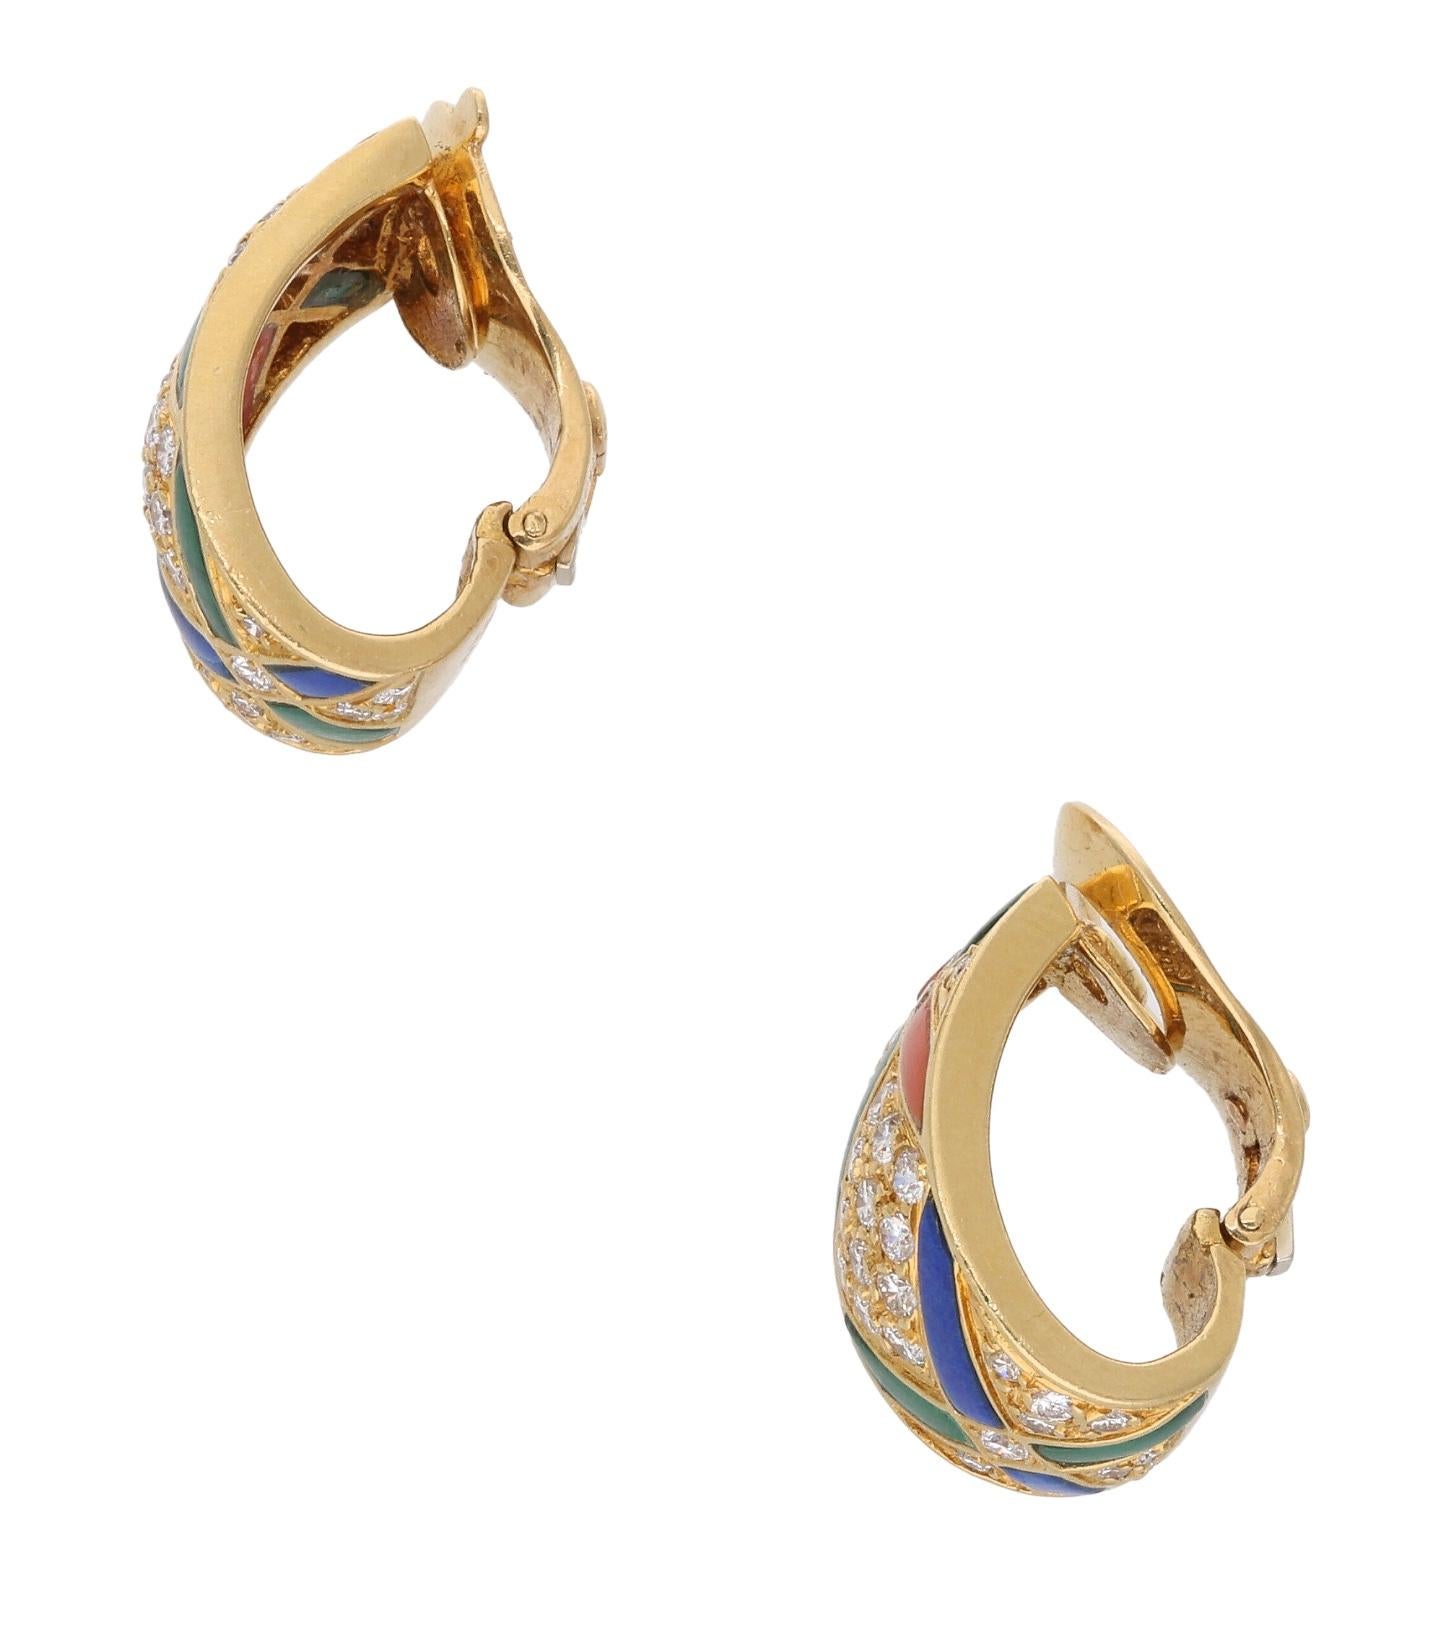 These ear clips feature a geometric design, set with lapis lazuli, malachite, coral, and diamonds.

- The diamonds weigh a total of approximately 0.50 carat
- Signed Van Cleef & Arpels (VCA)
- France
- 18 karat yellow gold
- Total weight 16.75